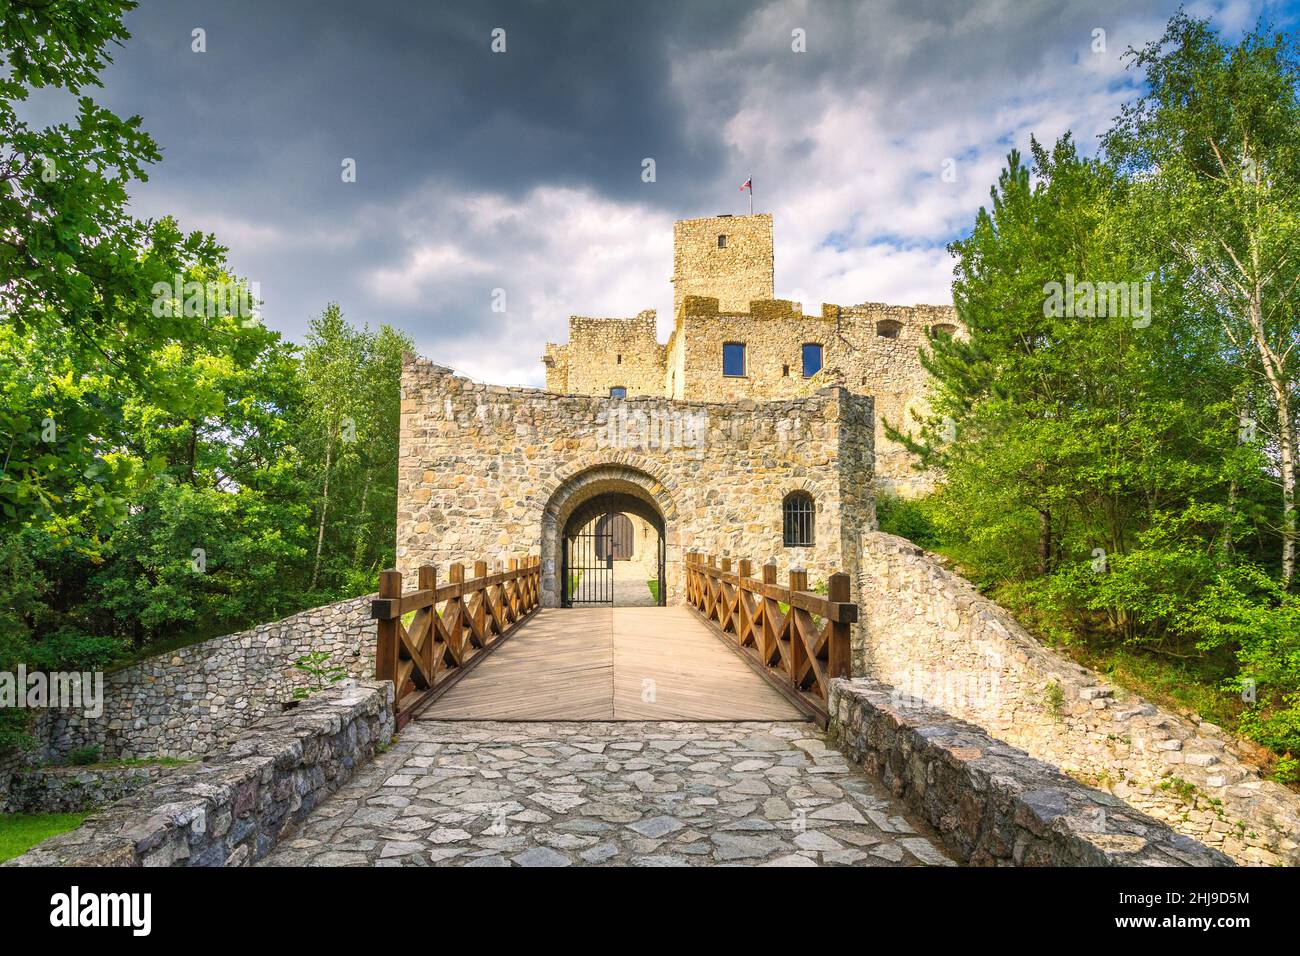 Entrance gate to the medieval castle Strecno nearby Zilina town, Slovakia, Europe Stock Photo